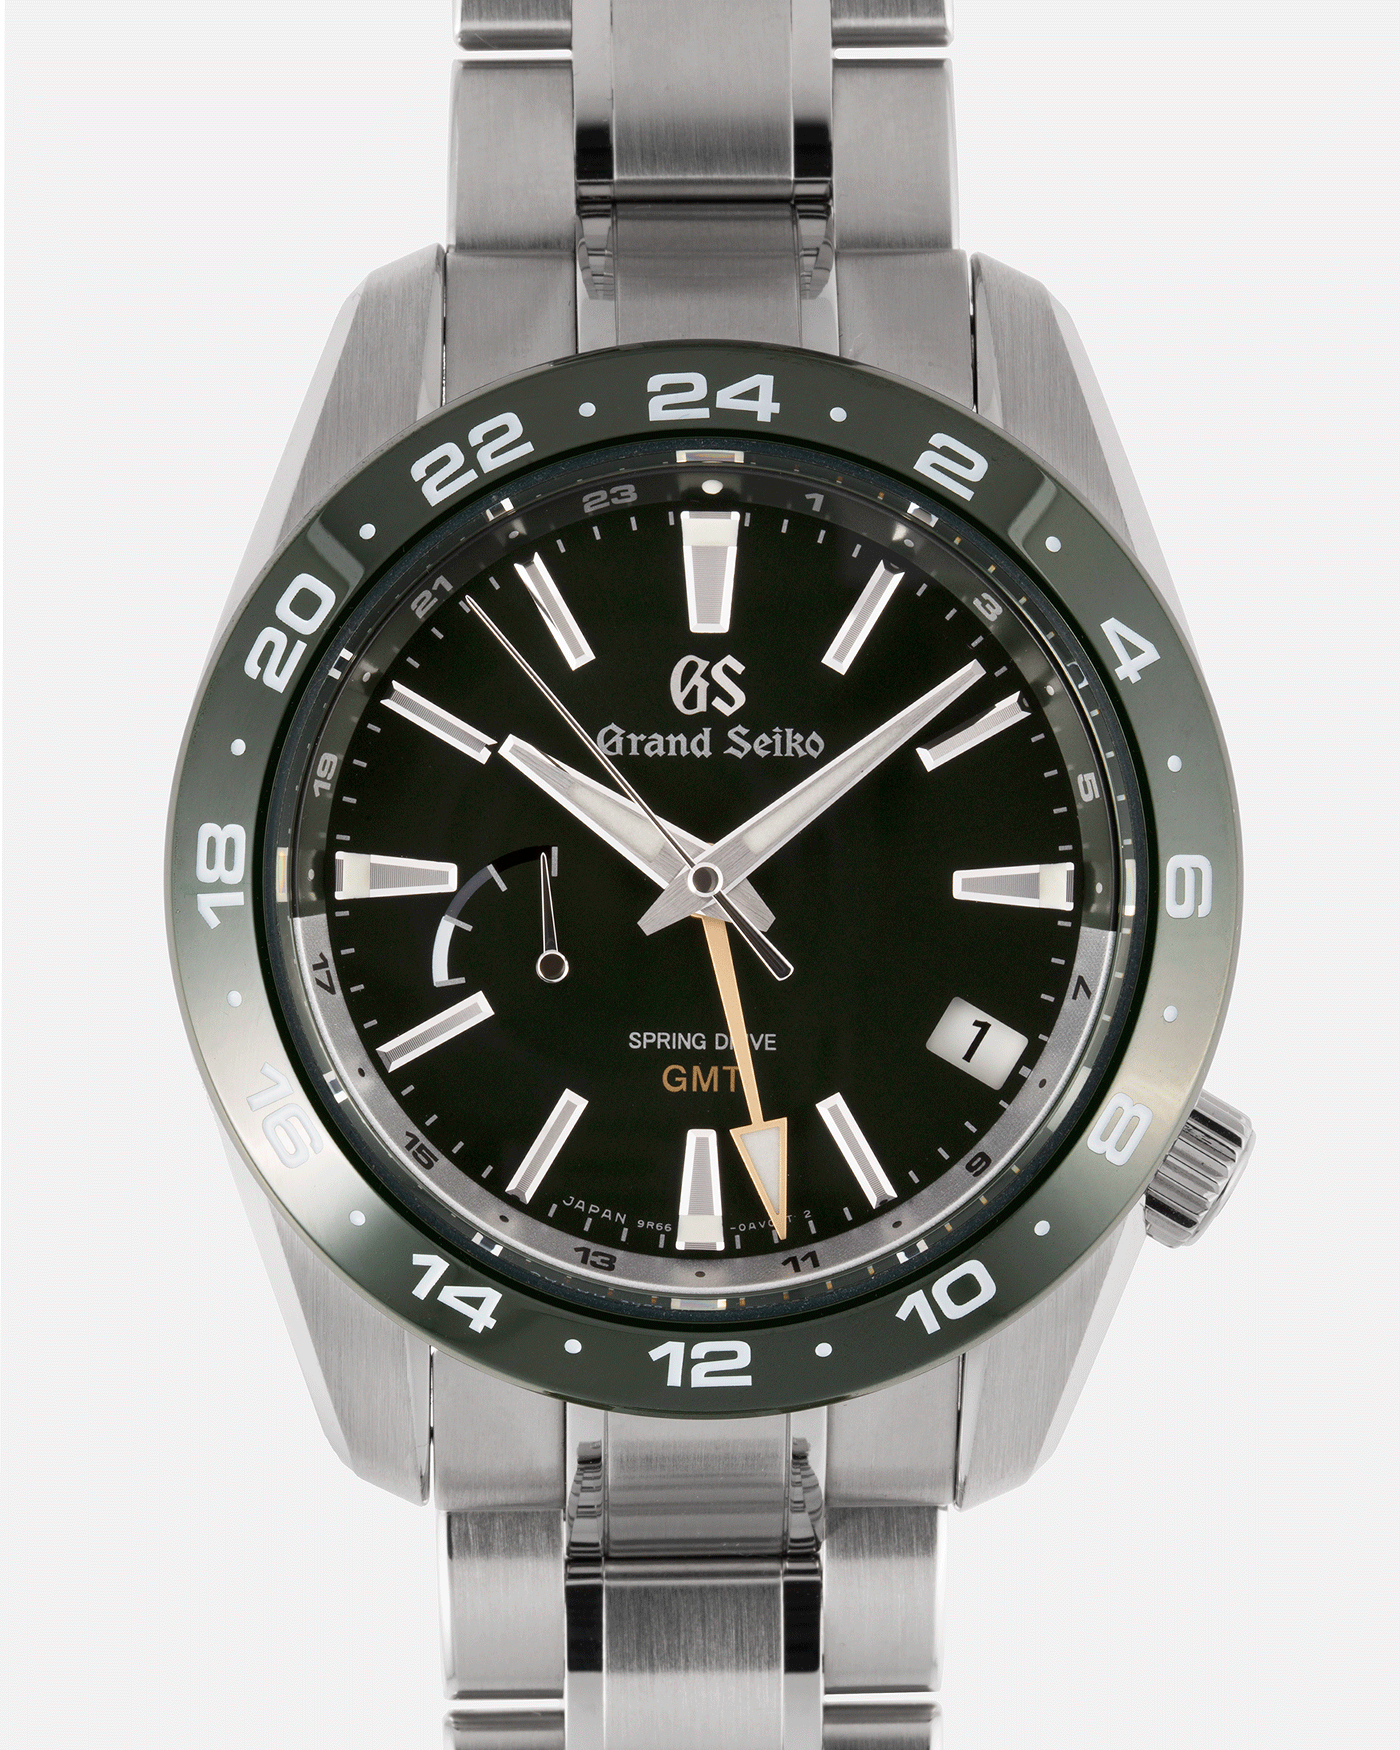 Brand: Grand Seiko Year: 2020 Reference Number: SBGE257 Spring Drive Material: Stainless Steel Movement: Cal. 9R66 Case Diameter: 40.5mm Bracelet: Grand Seiko Stainless Steel Bracelet